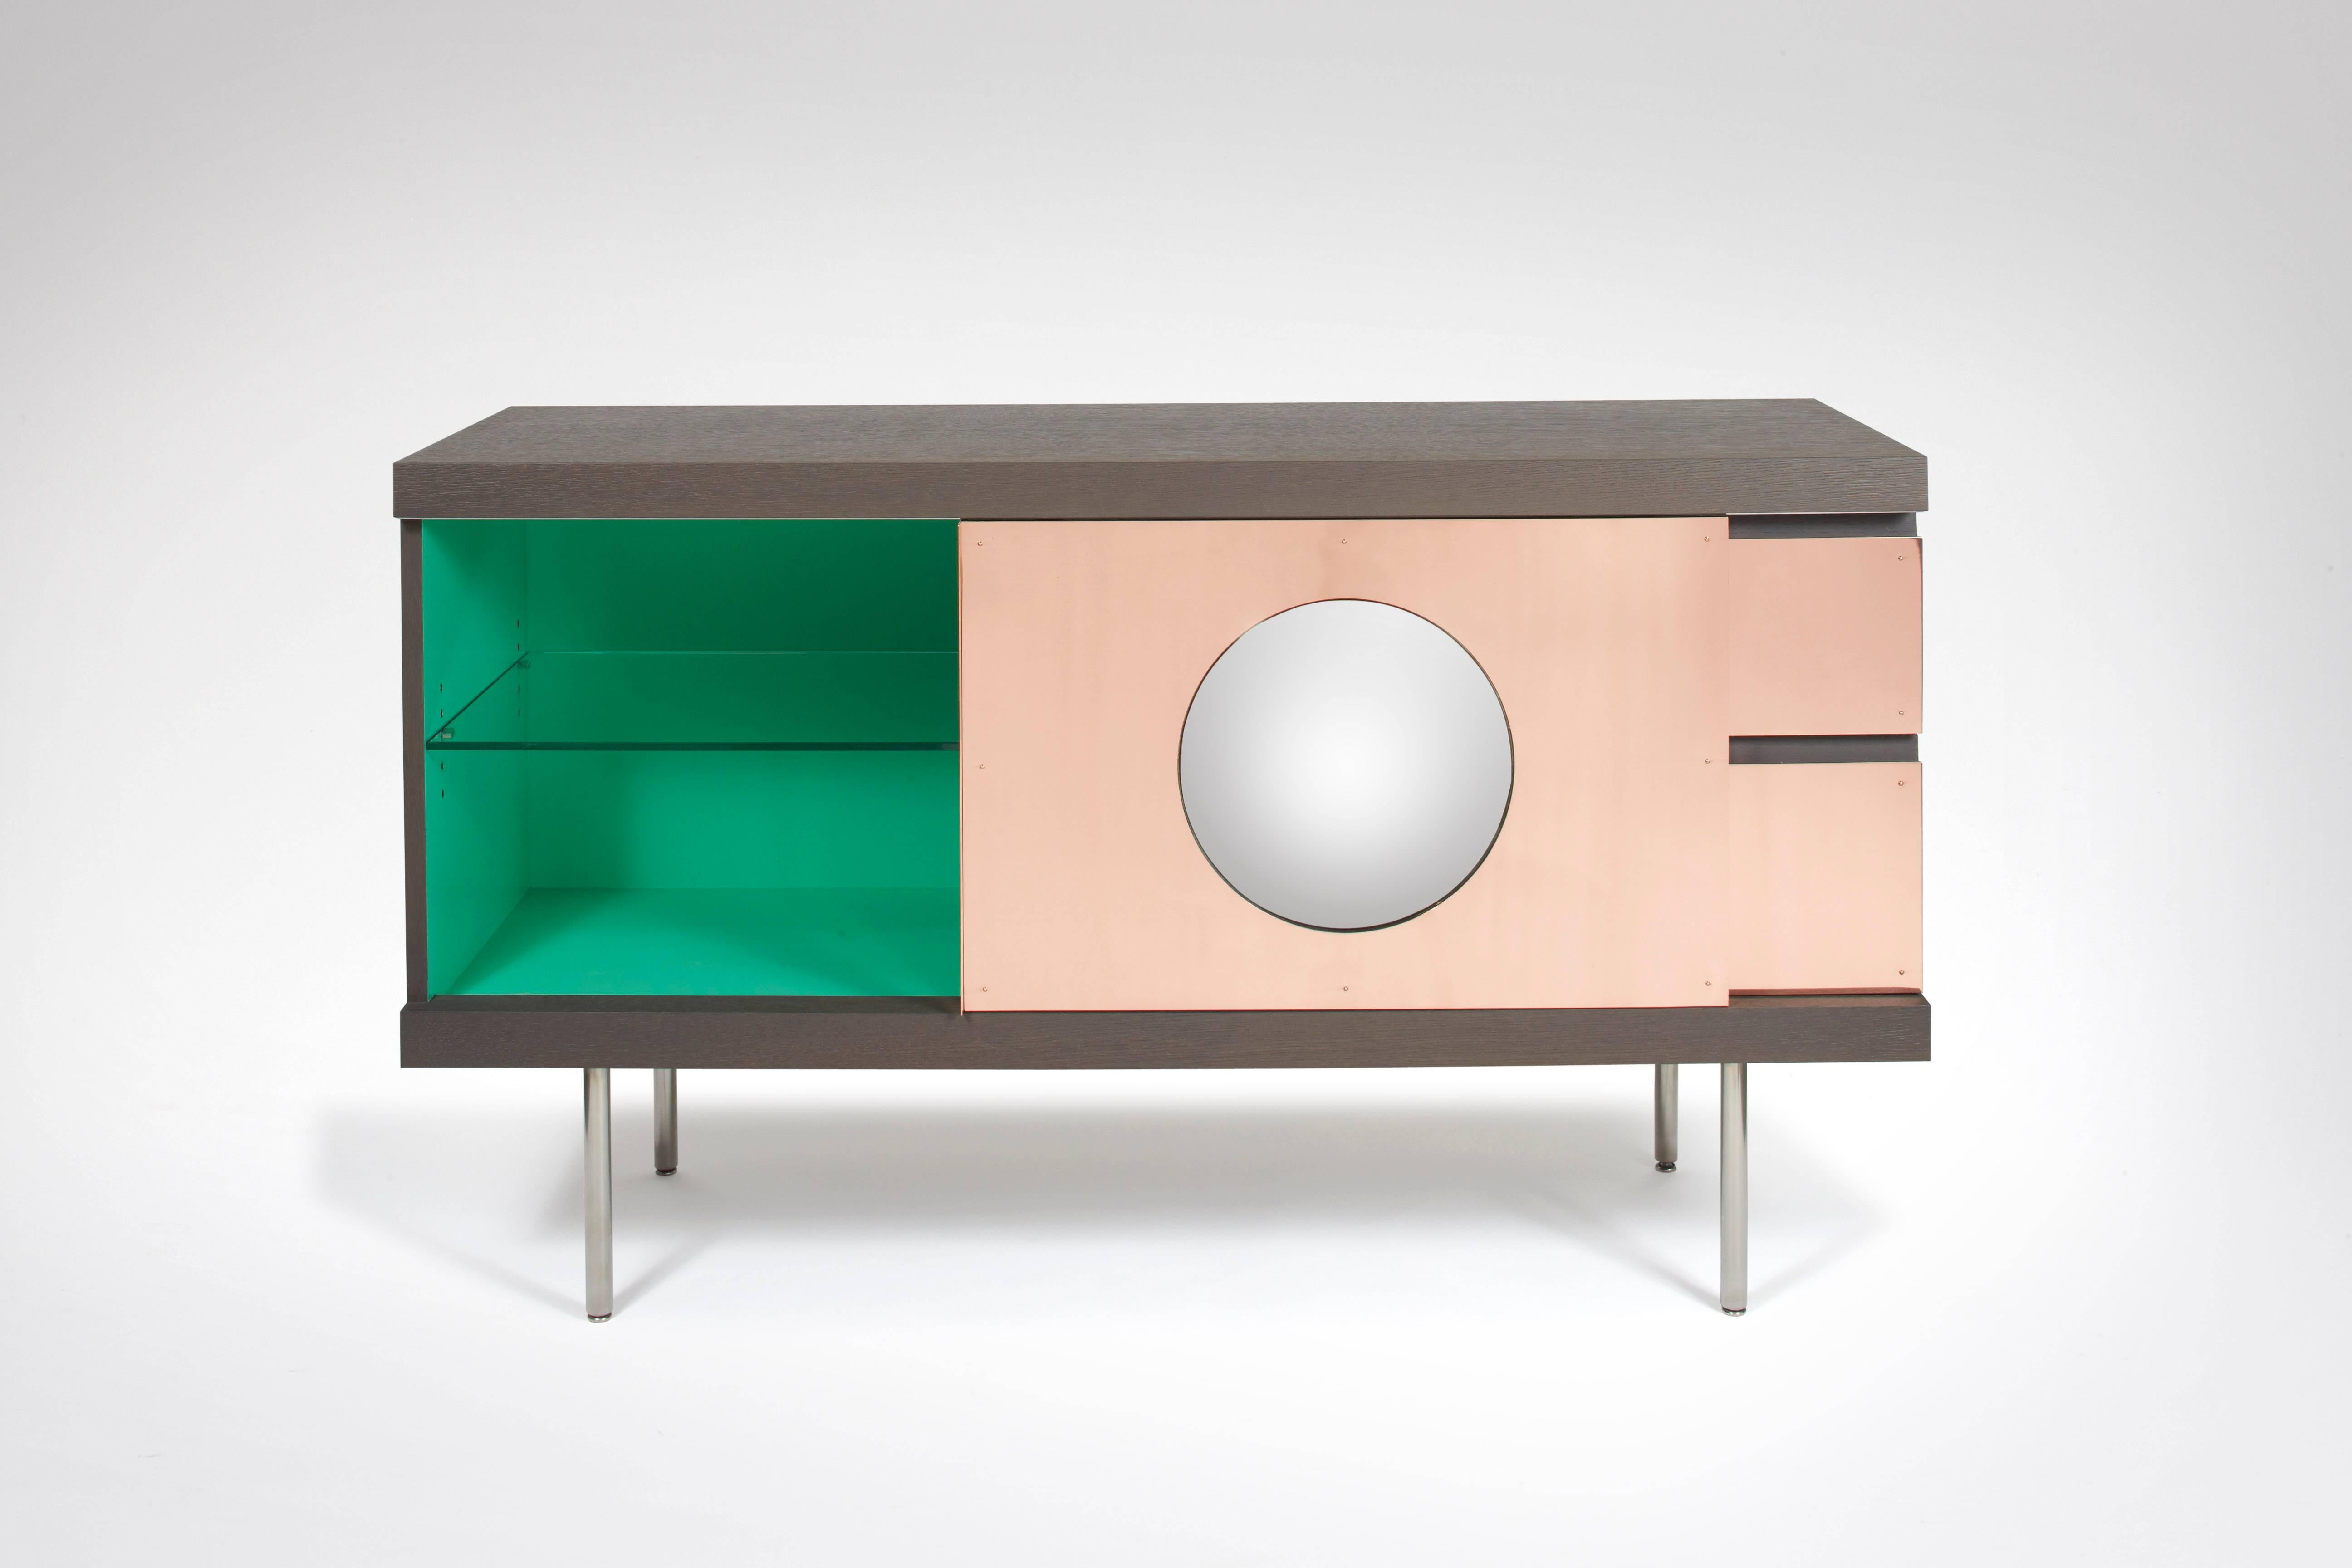 Alice.
Cat-Berro Edition 2016.
Sideboard.
One sliding door. Two drawers. Convex mirror.
Brushed stained oak. Red copper. Lacquer.
Measures: L 140 cm., H 81cm., D 48cm.
Edition of 12.